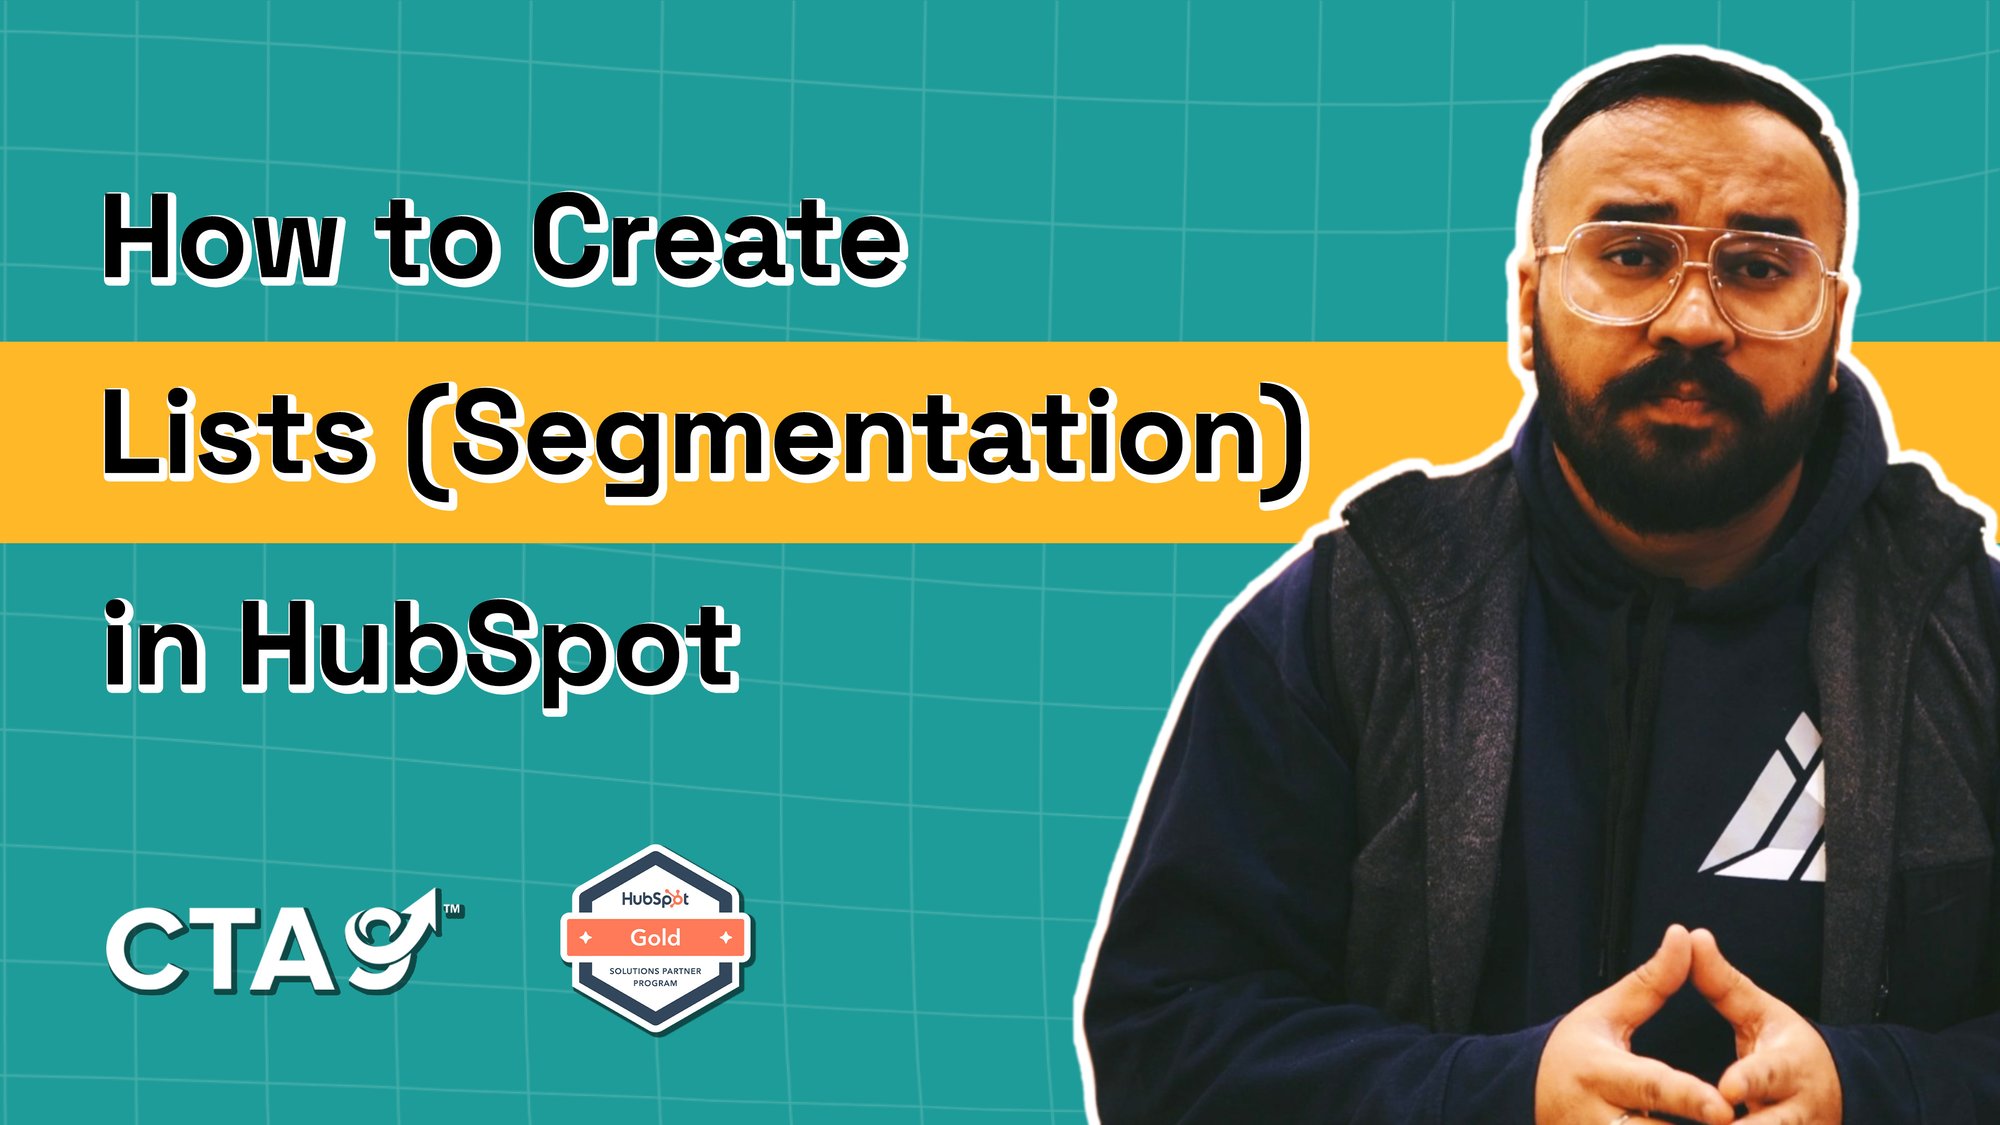 How to Create Lists (Segmentation) in HubSpot